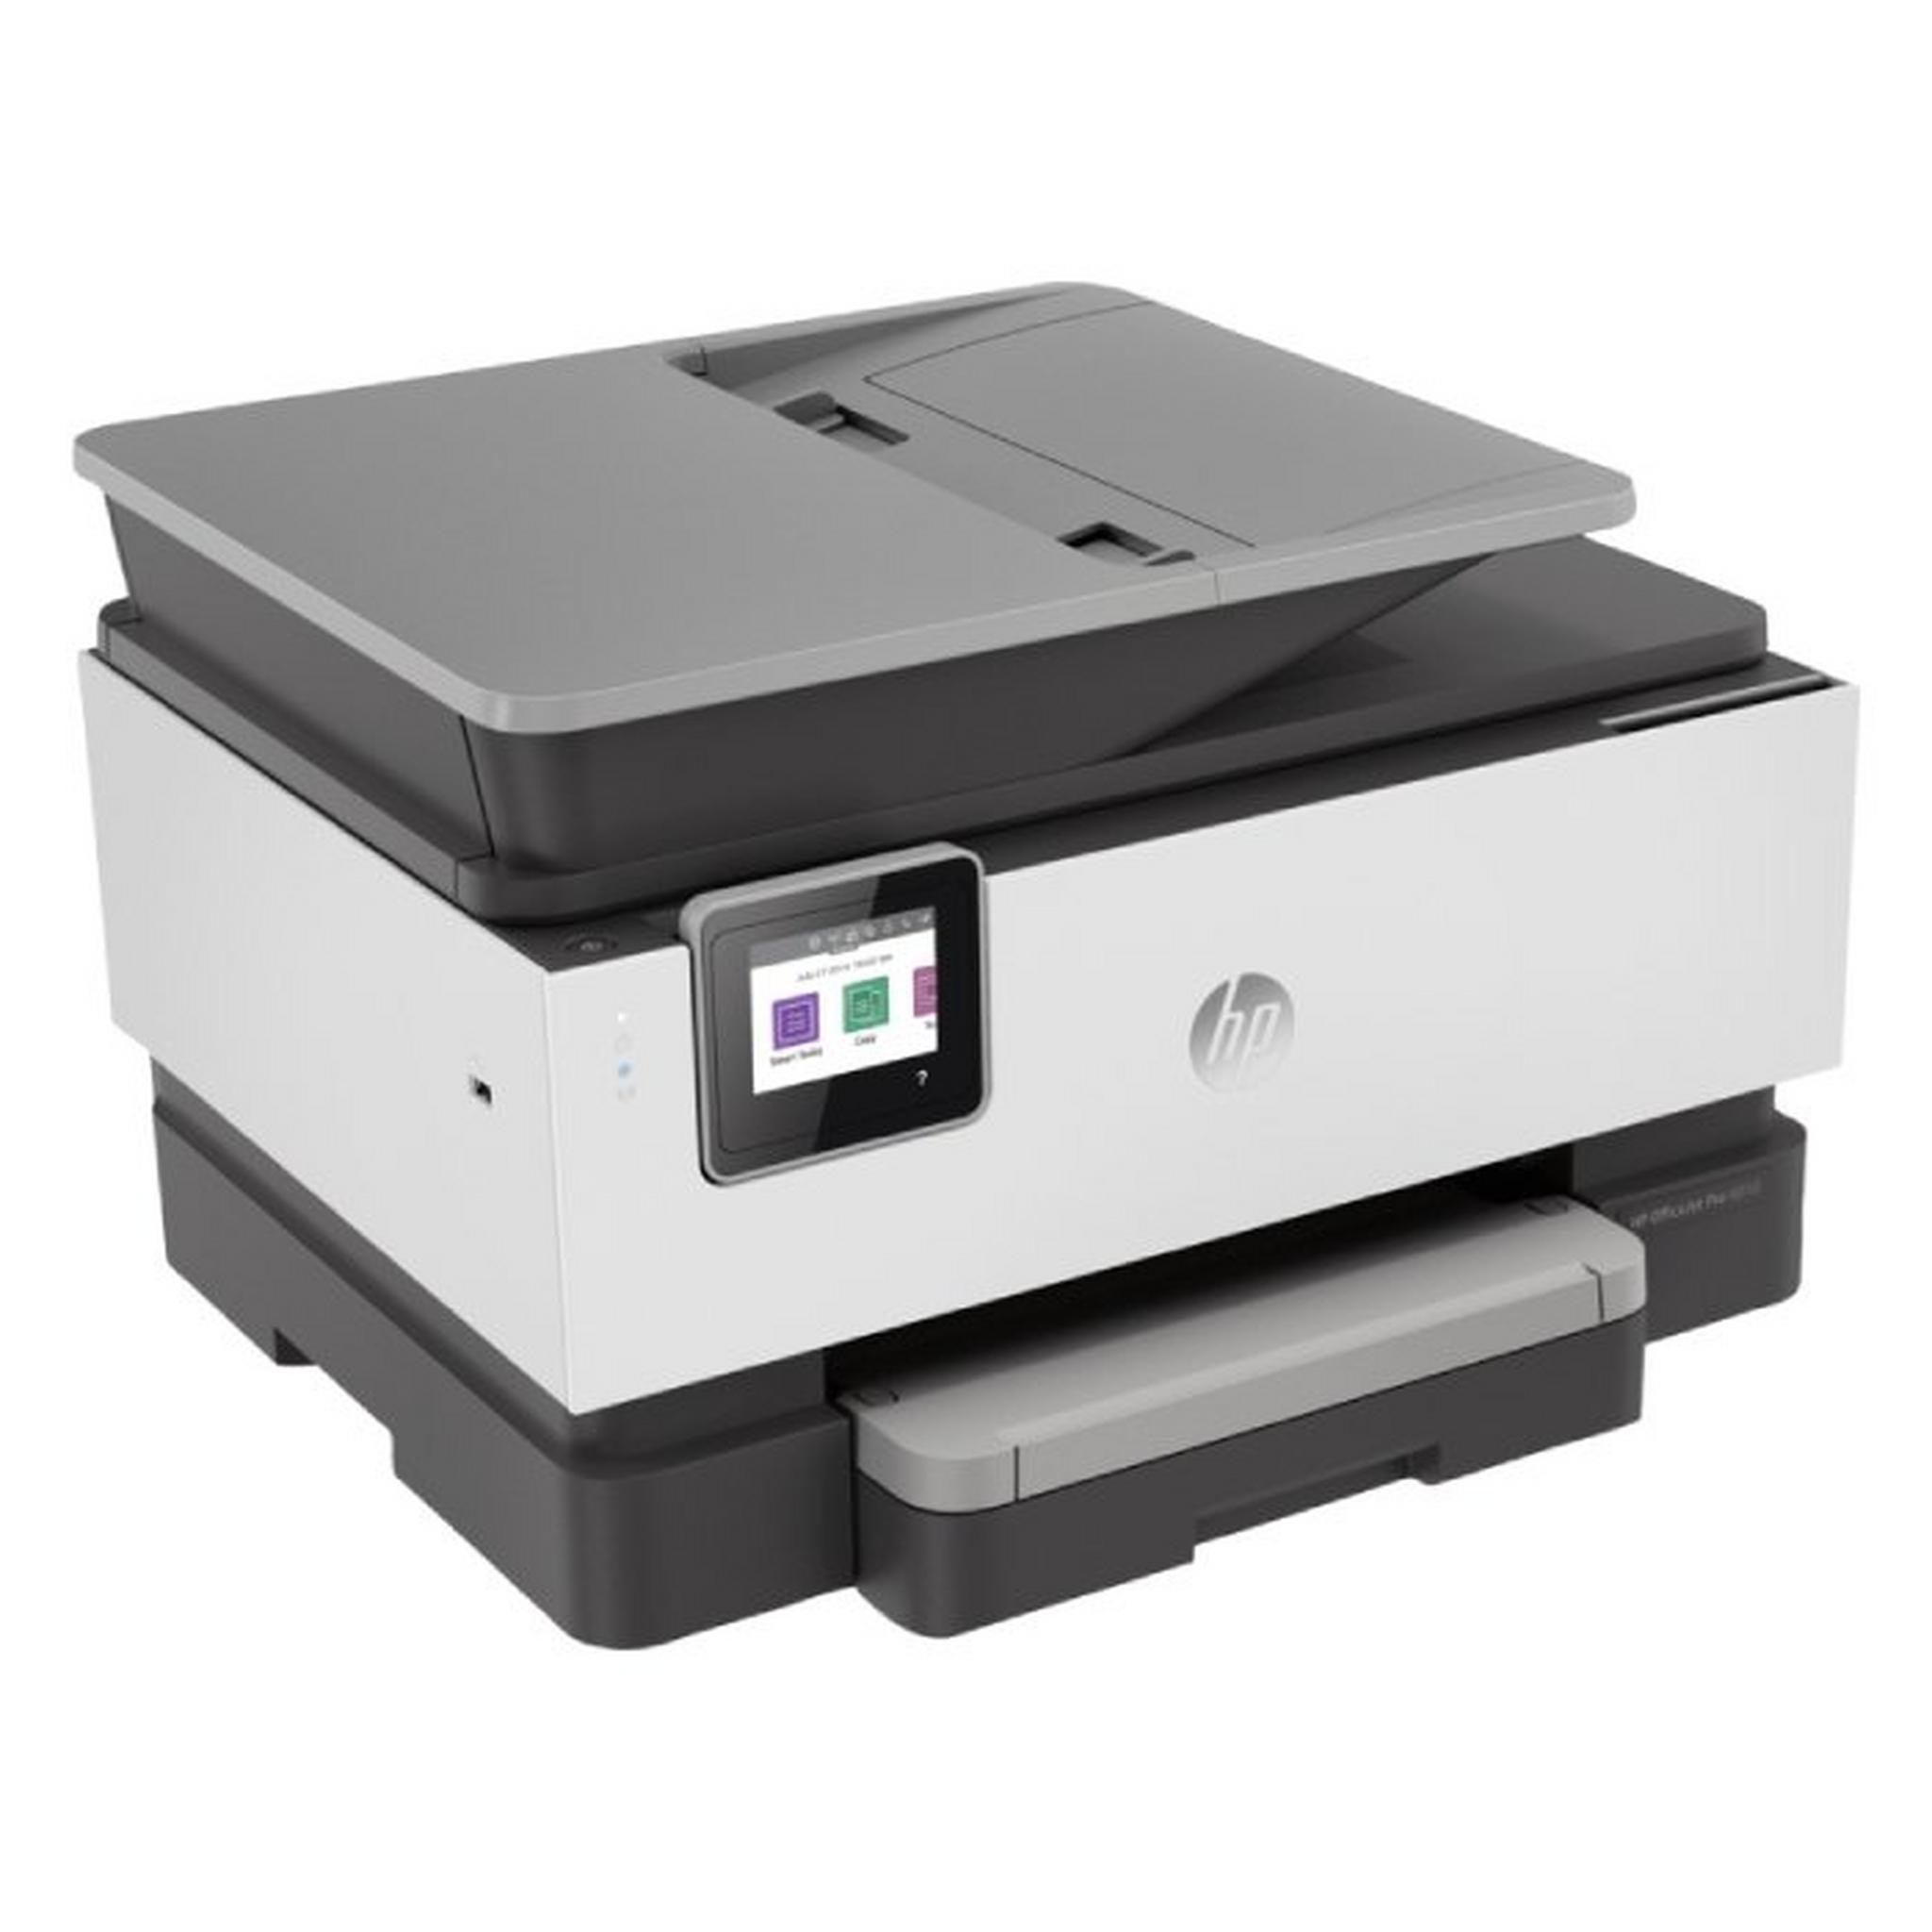 HP OfficeJet Pro 9010 All-in-One Printer